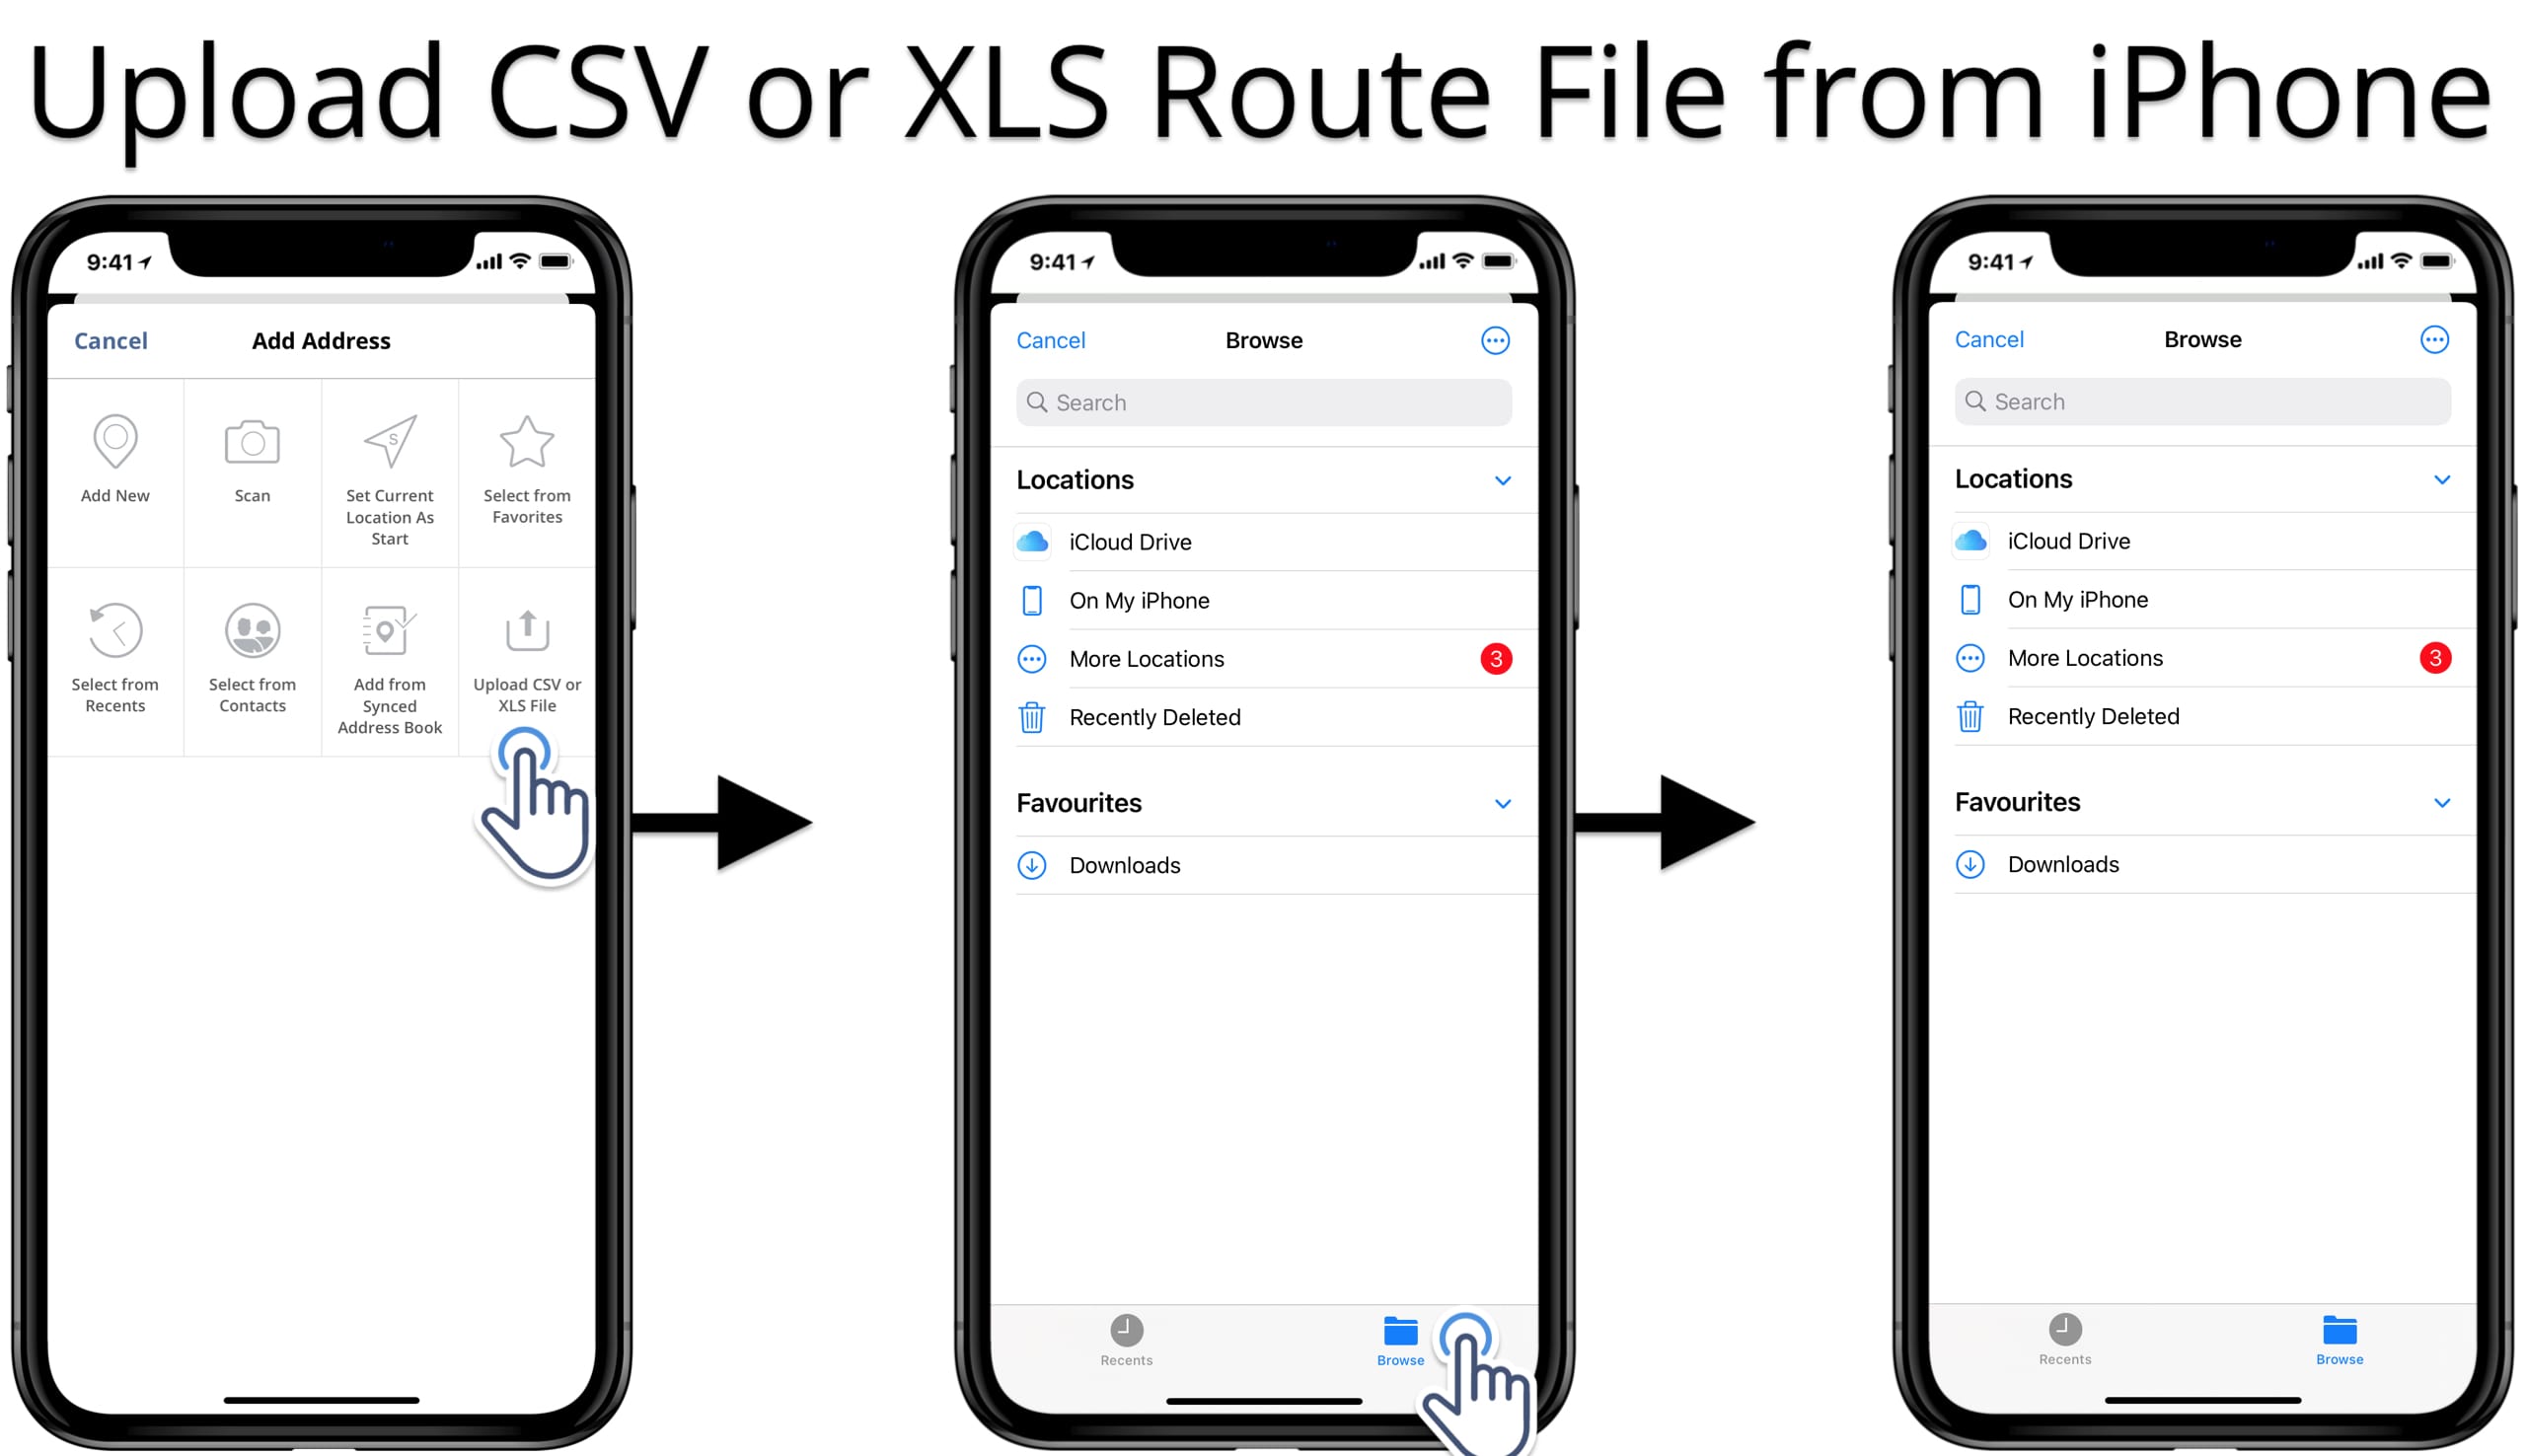 Upload CSV or XLS route files from your iPhone into the iOS route planner app.